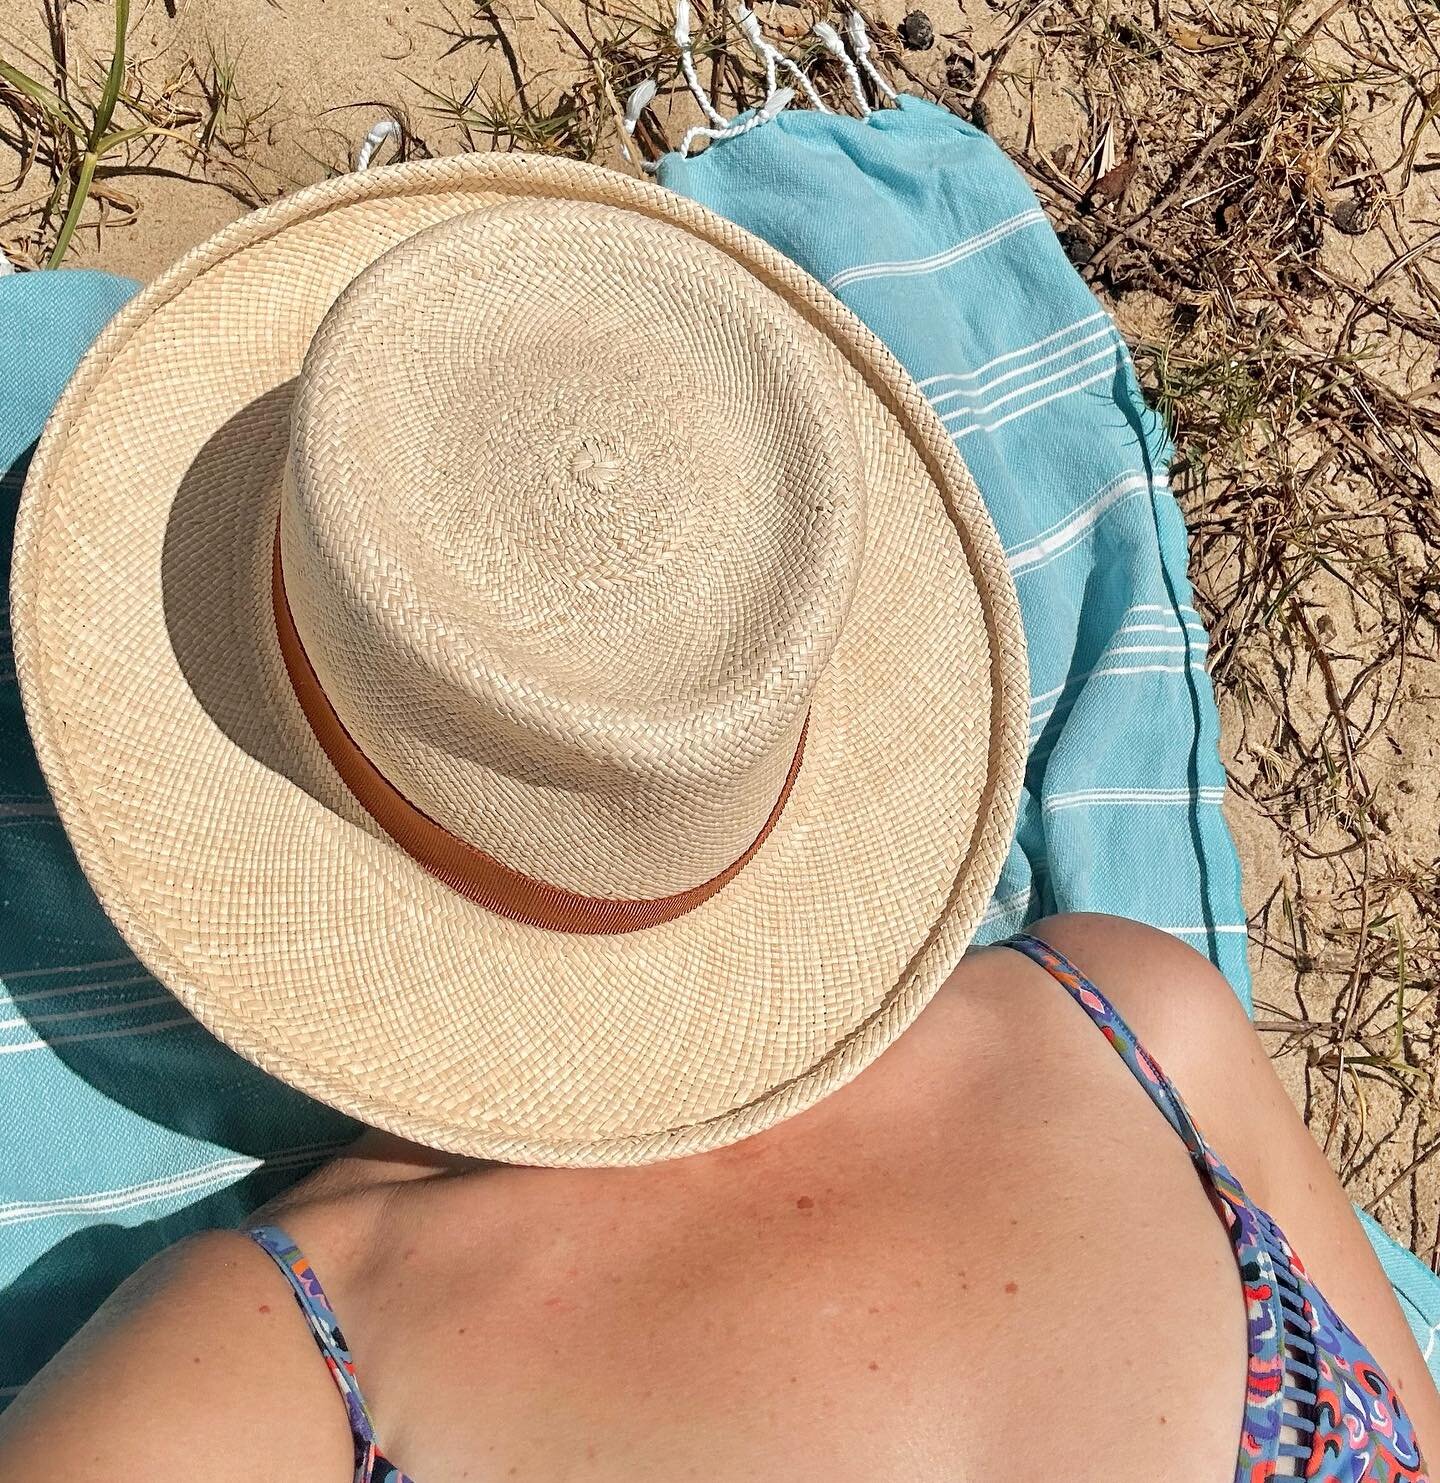 BRB&hellip;taking some time out this week, hanging with family and making millinery plans for 2024. Exciting times ahead with lots of new things coming your way!

Wearing curled brim Panama hat. DM to order.